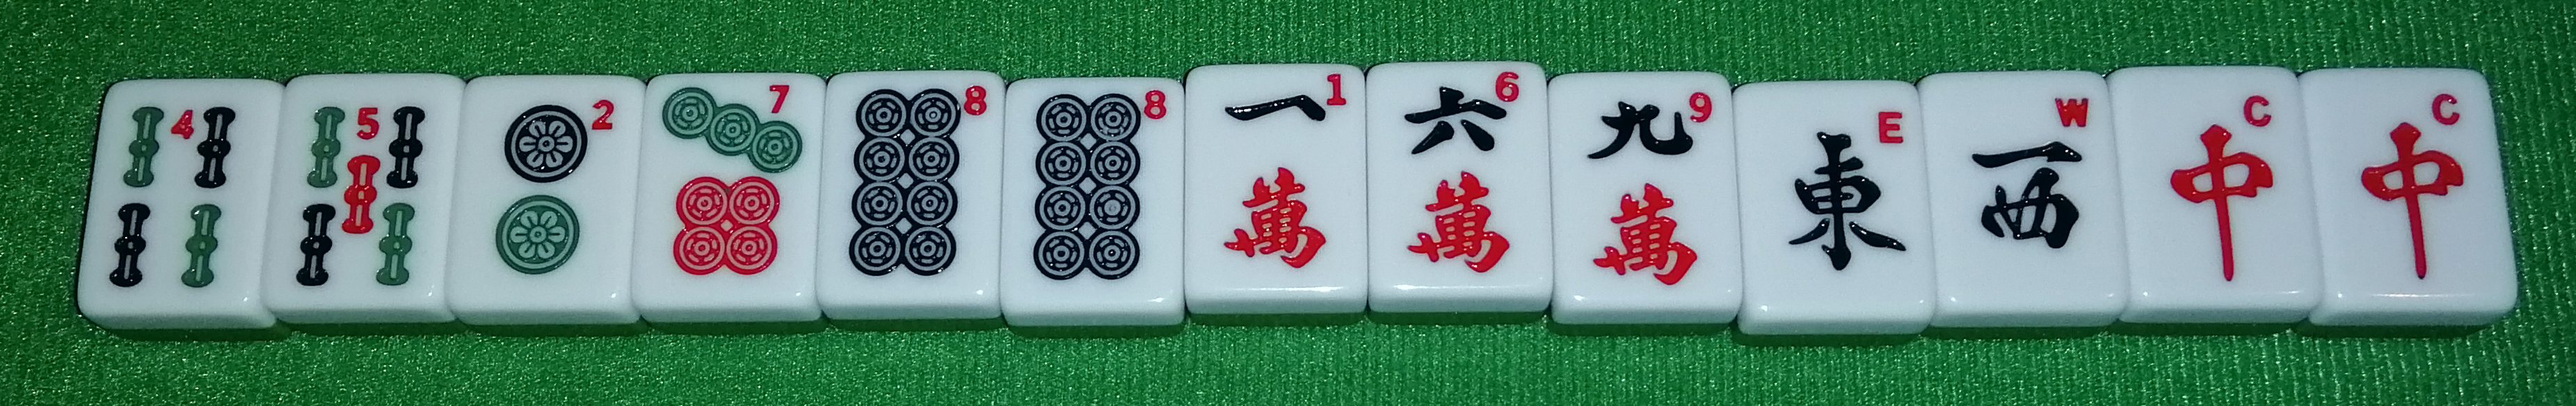 A potential hand. From left to right: 4-Sou, 5-Sou, 2-Pin, 7-Pin, 8-Pin, 8-Pin, 1-Wan,
						6-Wan, 9-Wan, Ton, Sha, Chun, Chun.